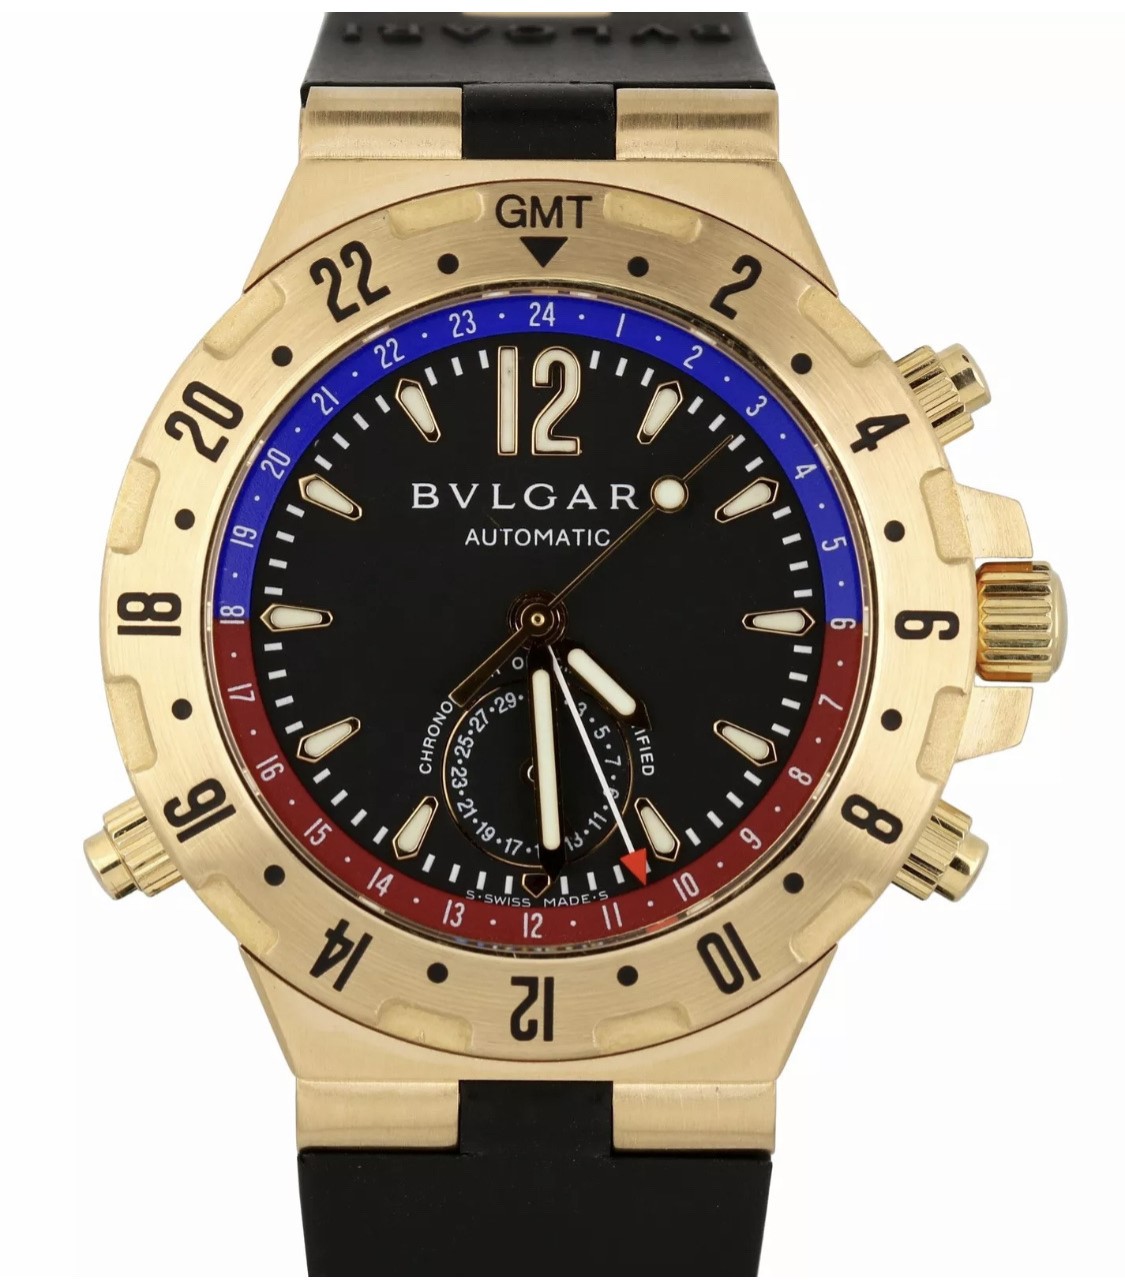 Bvlgari Gold Watch Buyer Collectors Coins & Jewelry Lynbrook (516)341-7355